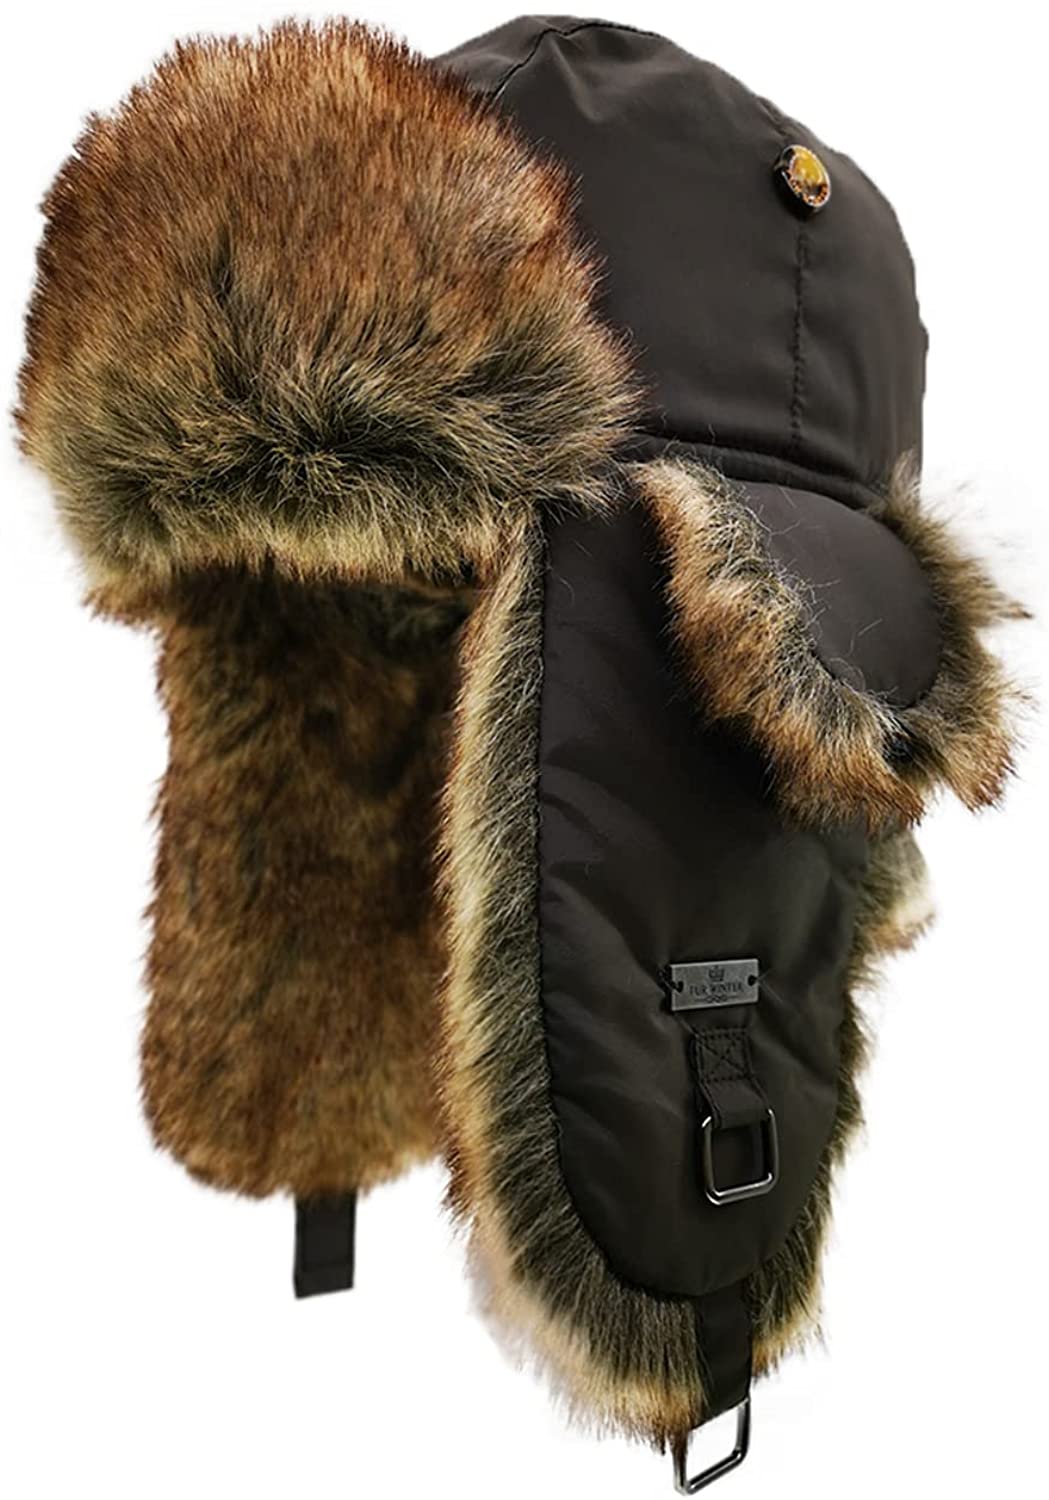 NICE CAPS Men's Cold Weather Taslon Trapper Hat with Flaps 